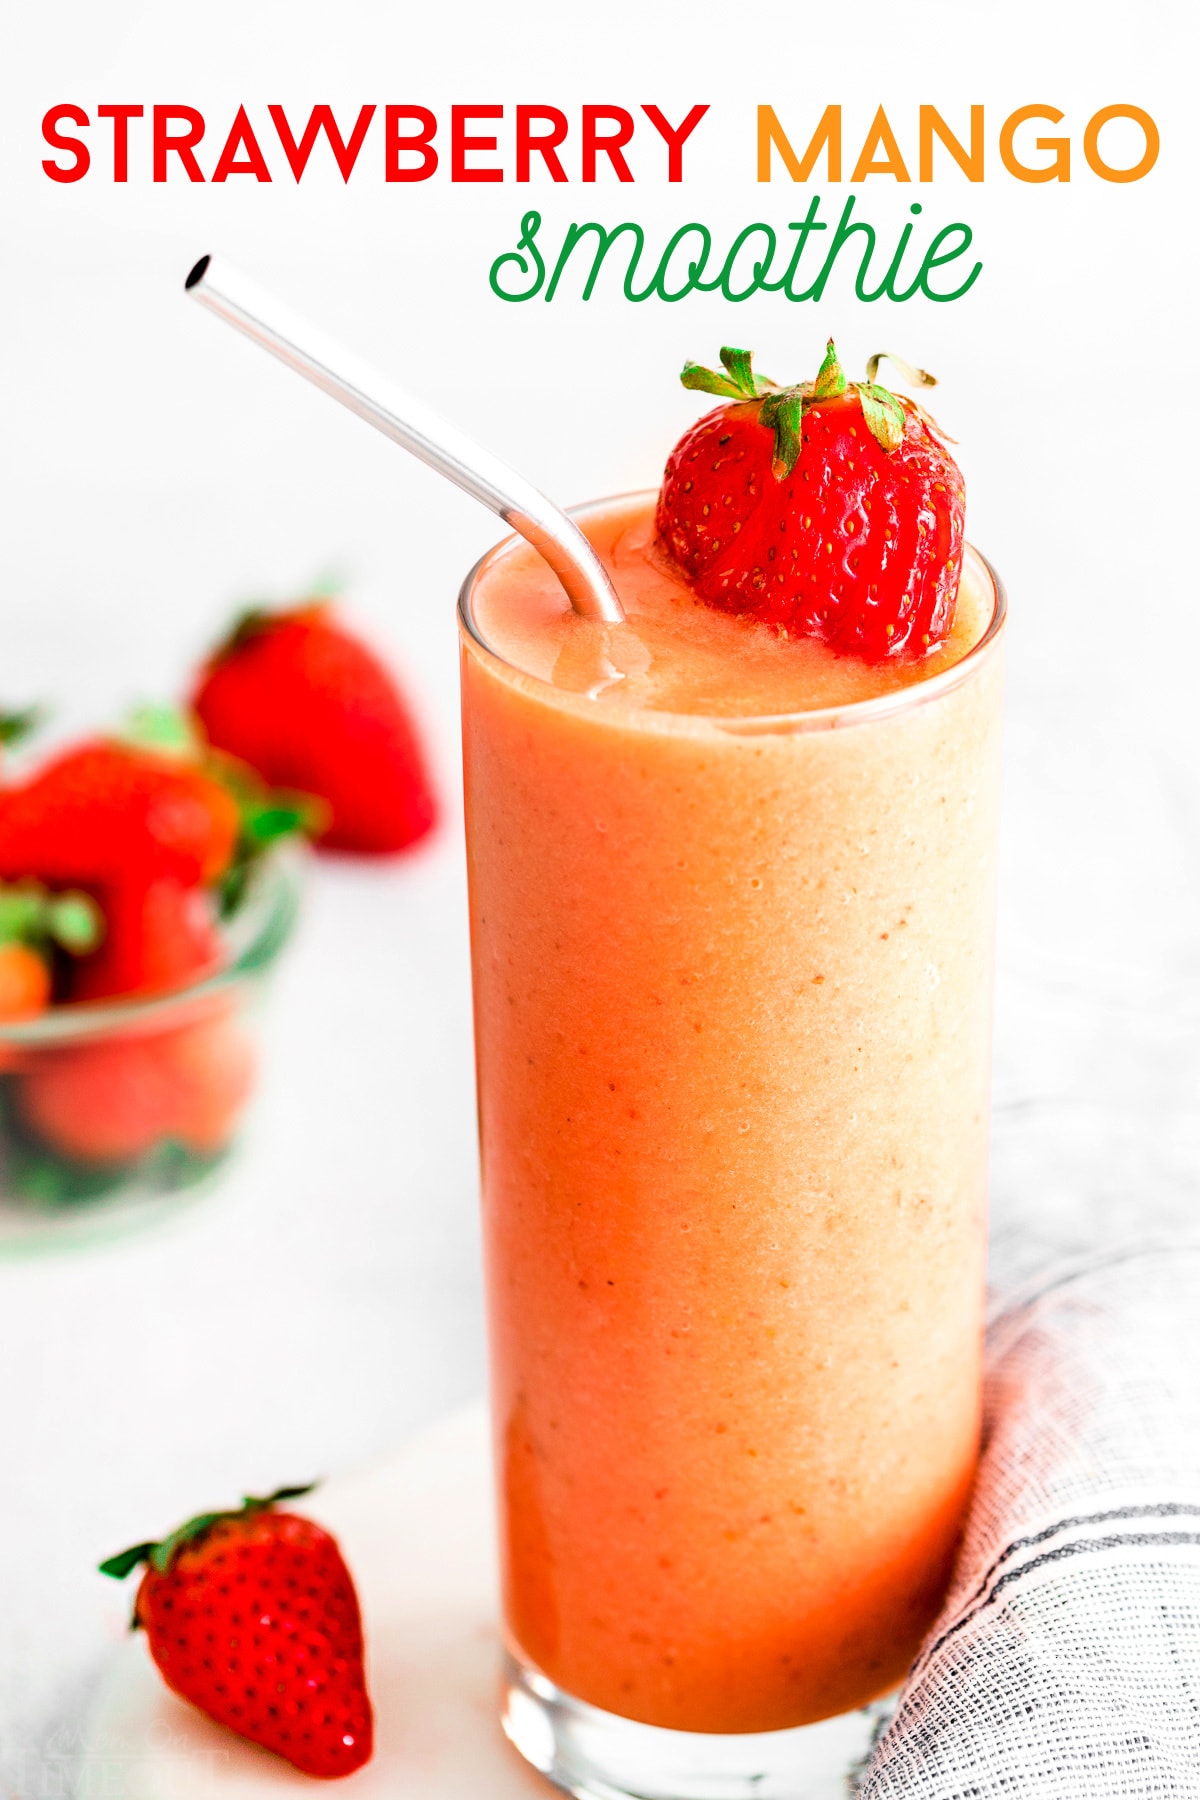 strawberry mango smoothie in tall glass with steel straw and garnished with fresh strawberries. title overlay at top of image.